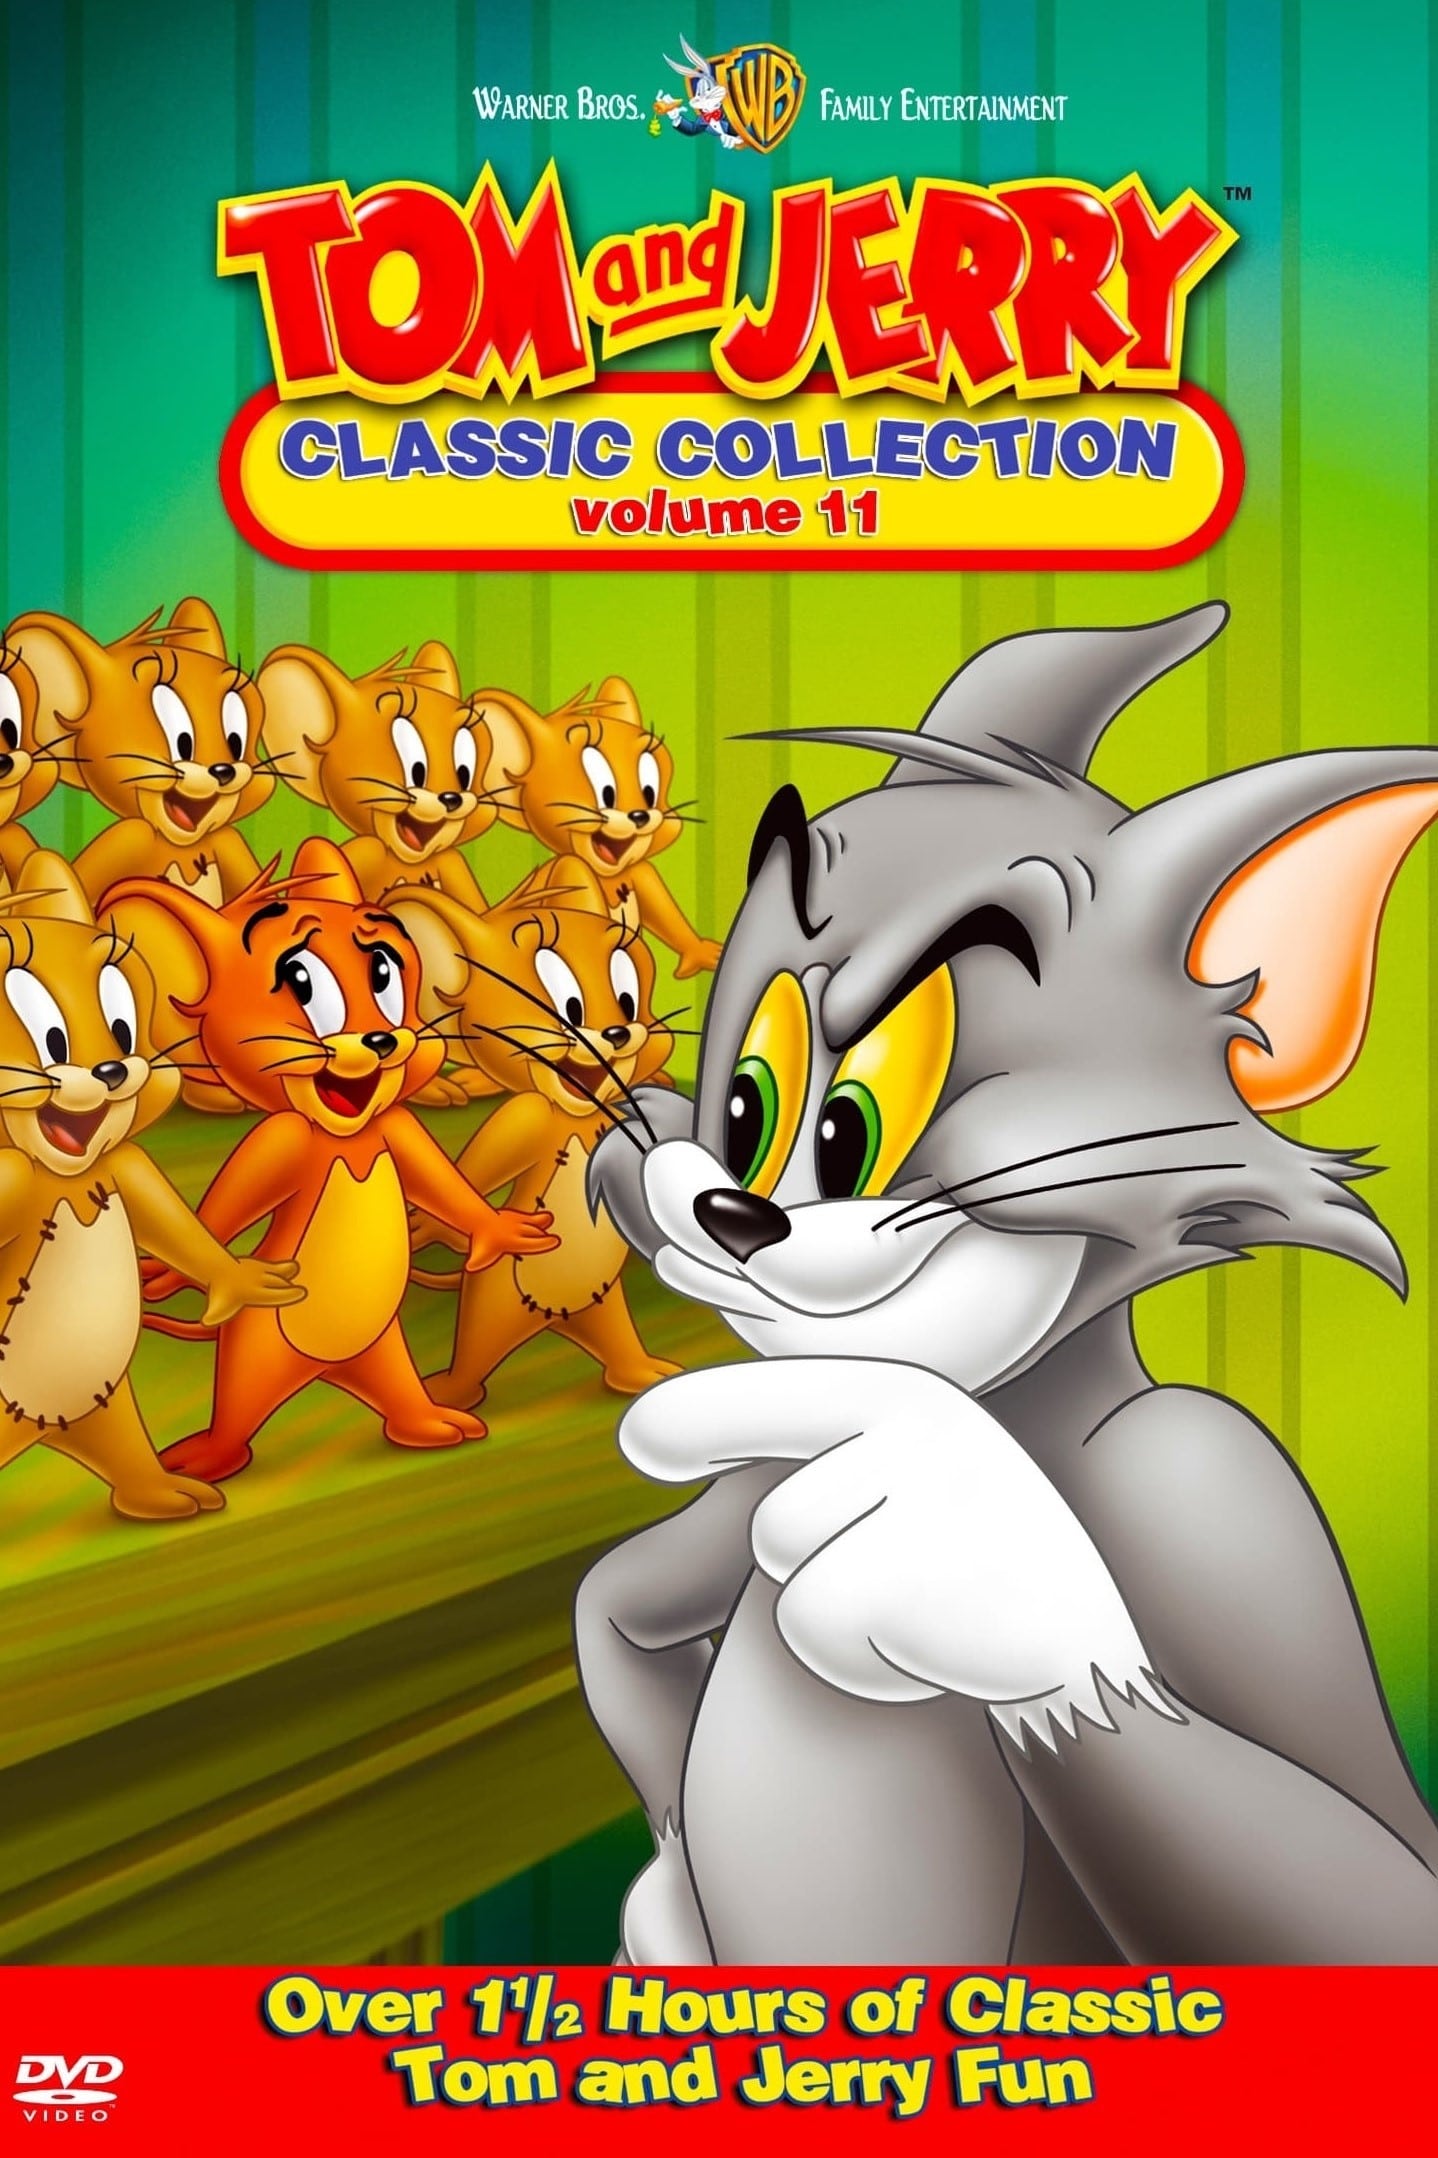 Tom and Jerry: The Classic Collection Volume 11